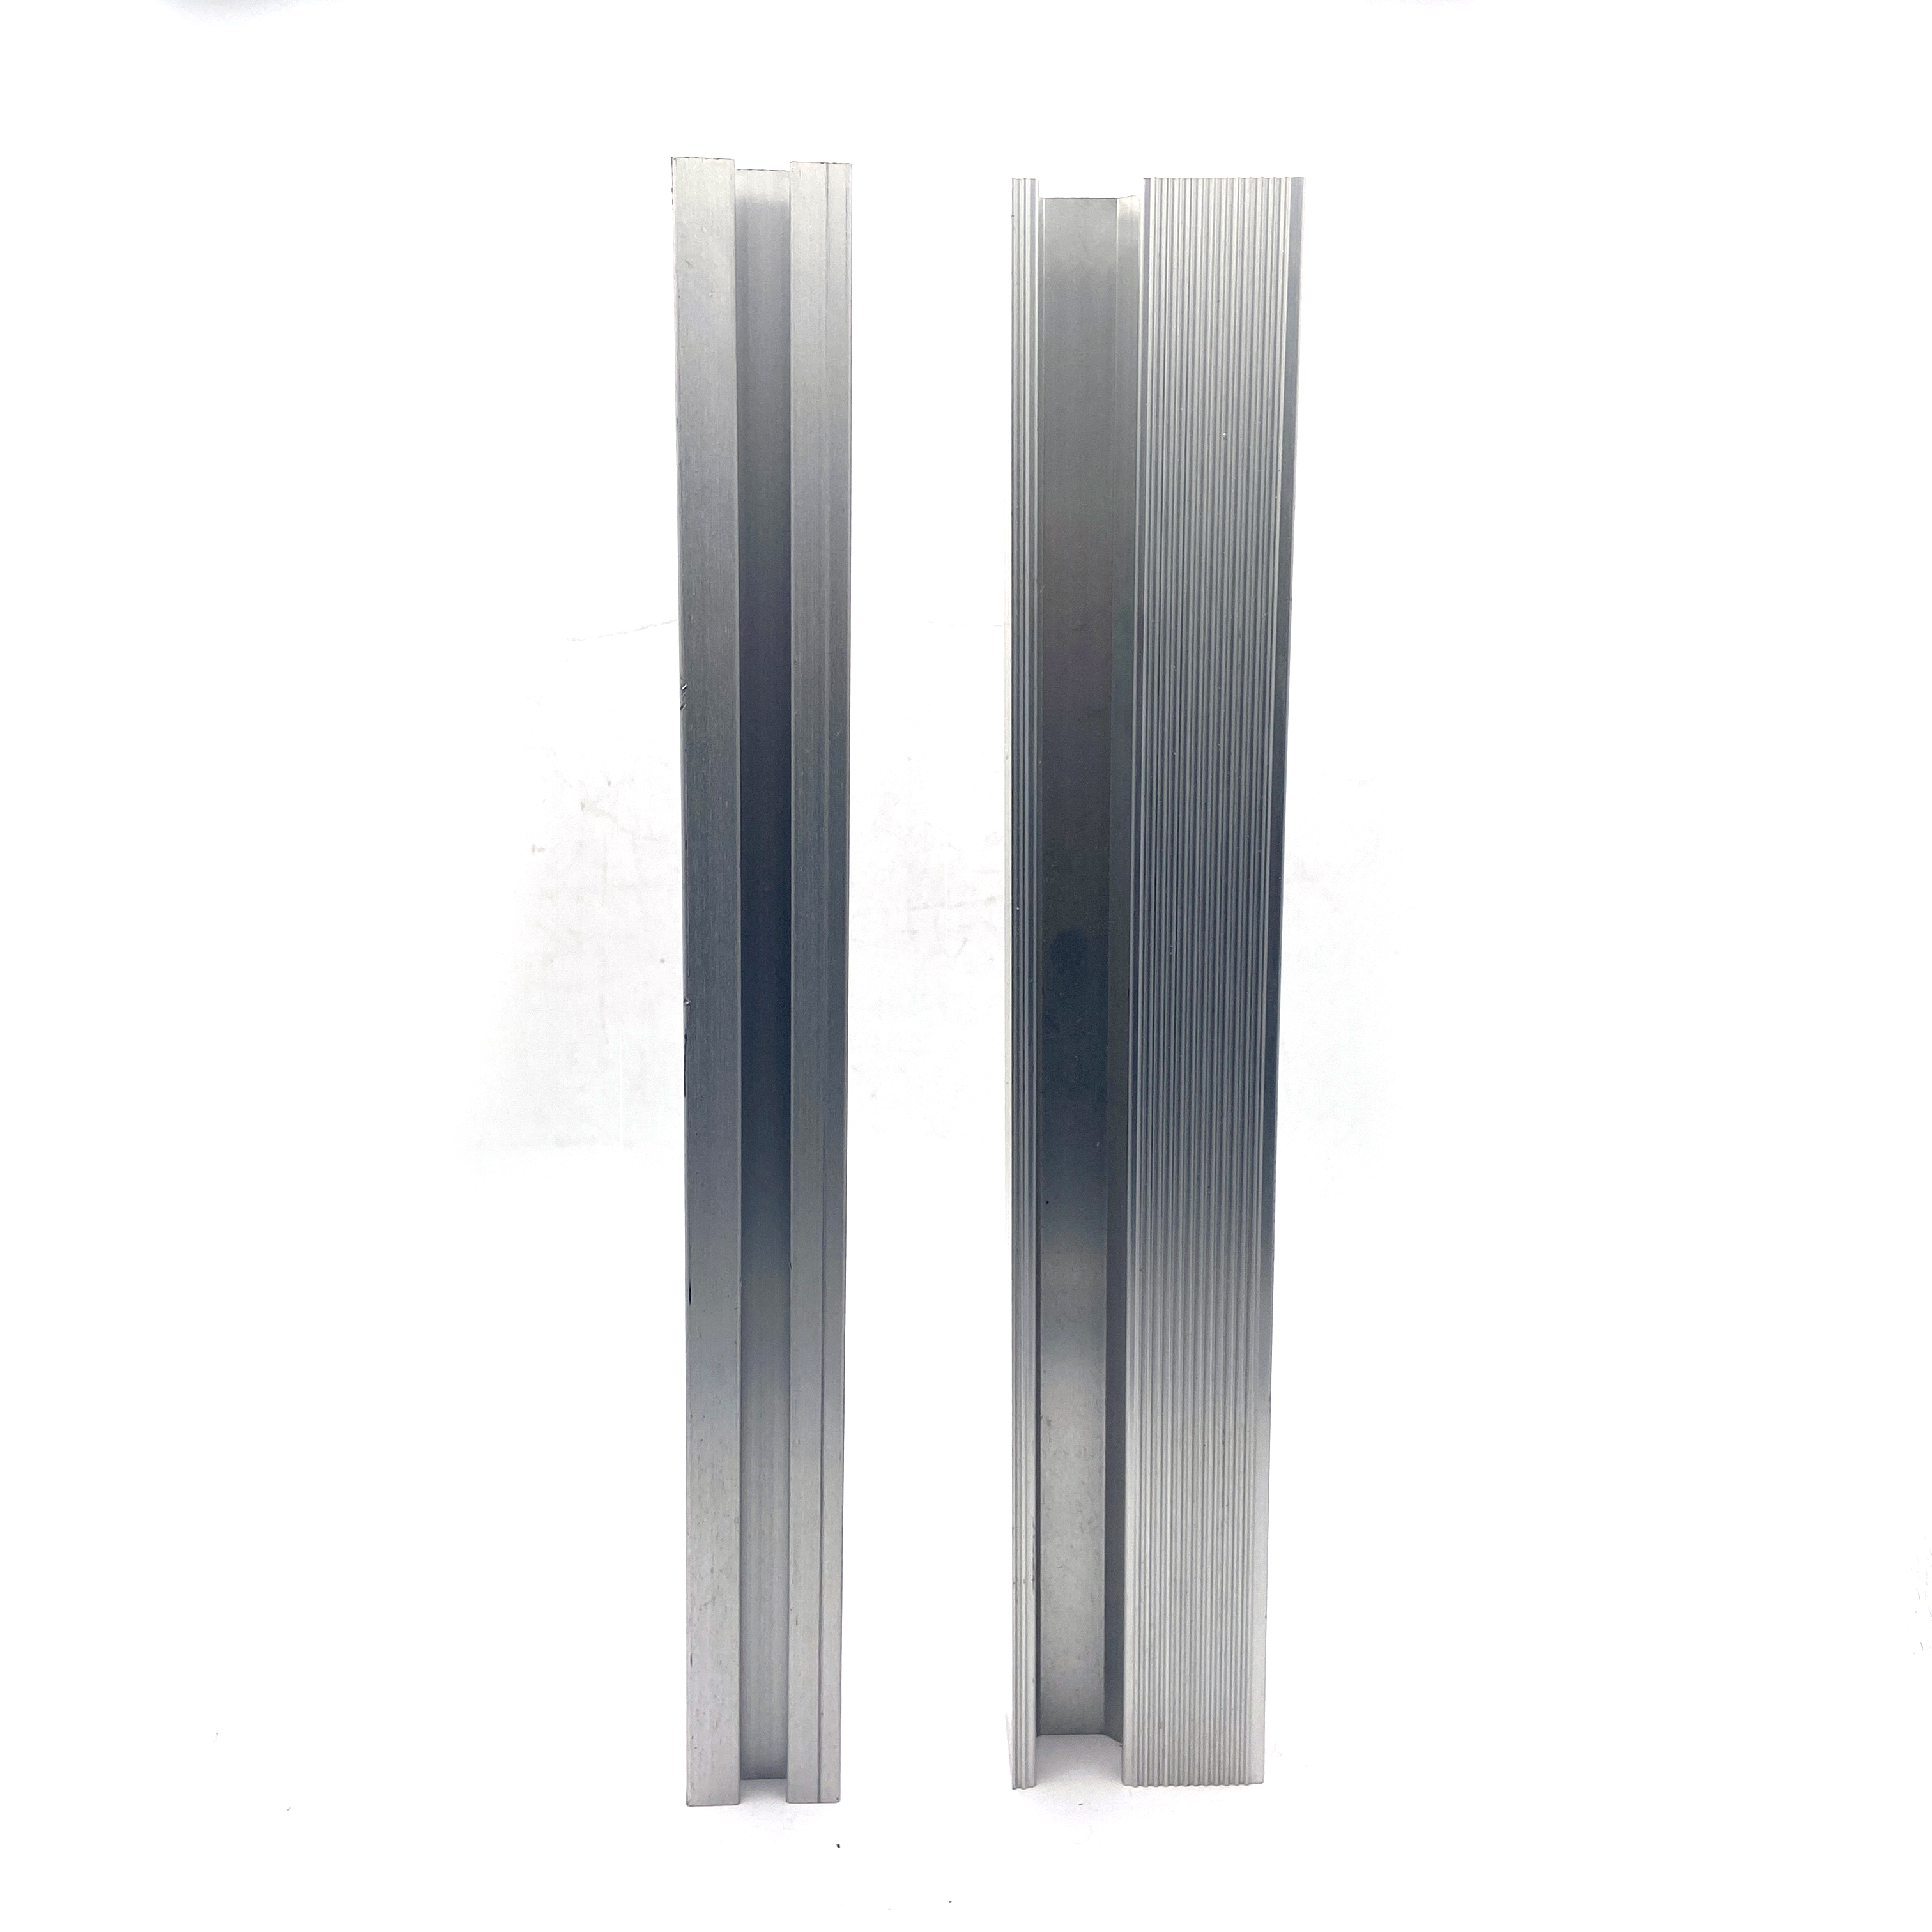 Customized Aluminum Alloy Solid Slot/Track/Channel/Section Aluminium Extrusion Profile